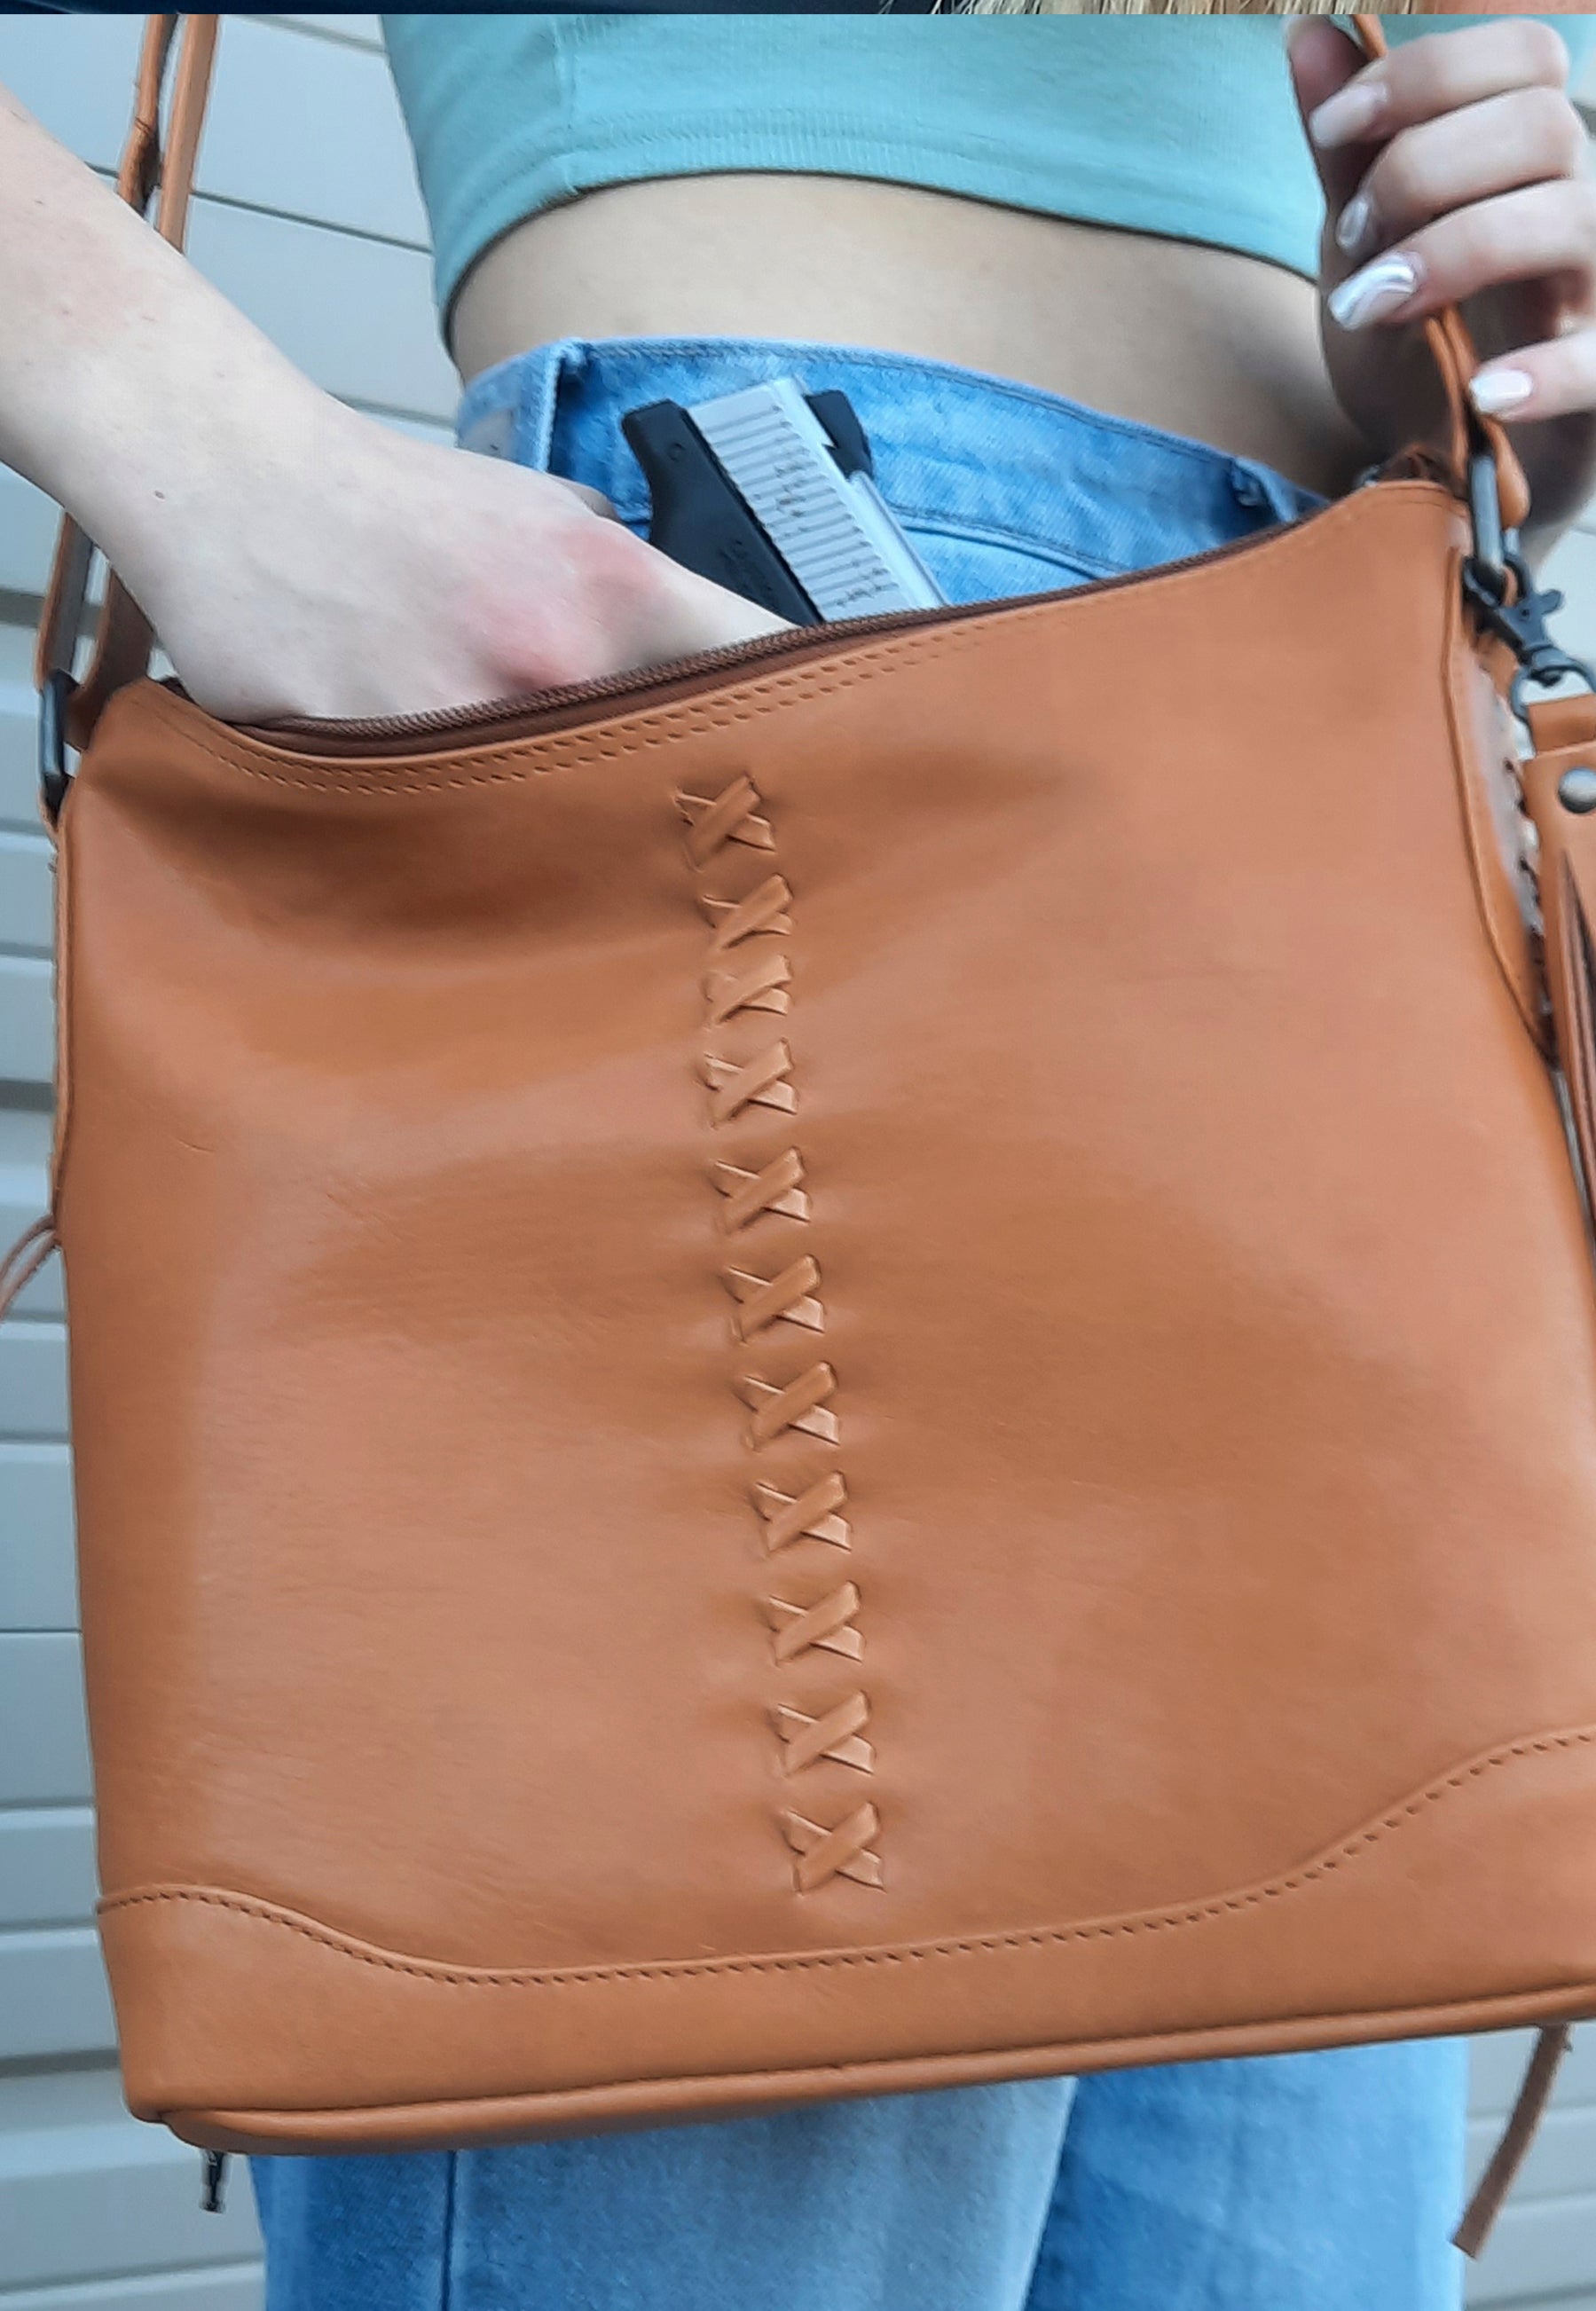 model wearing conceal carry purse